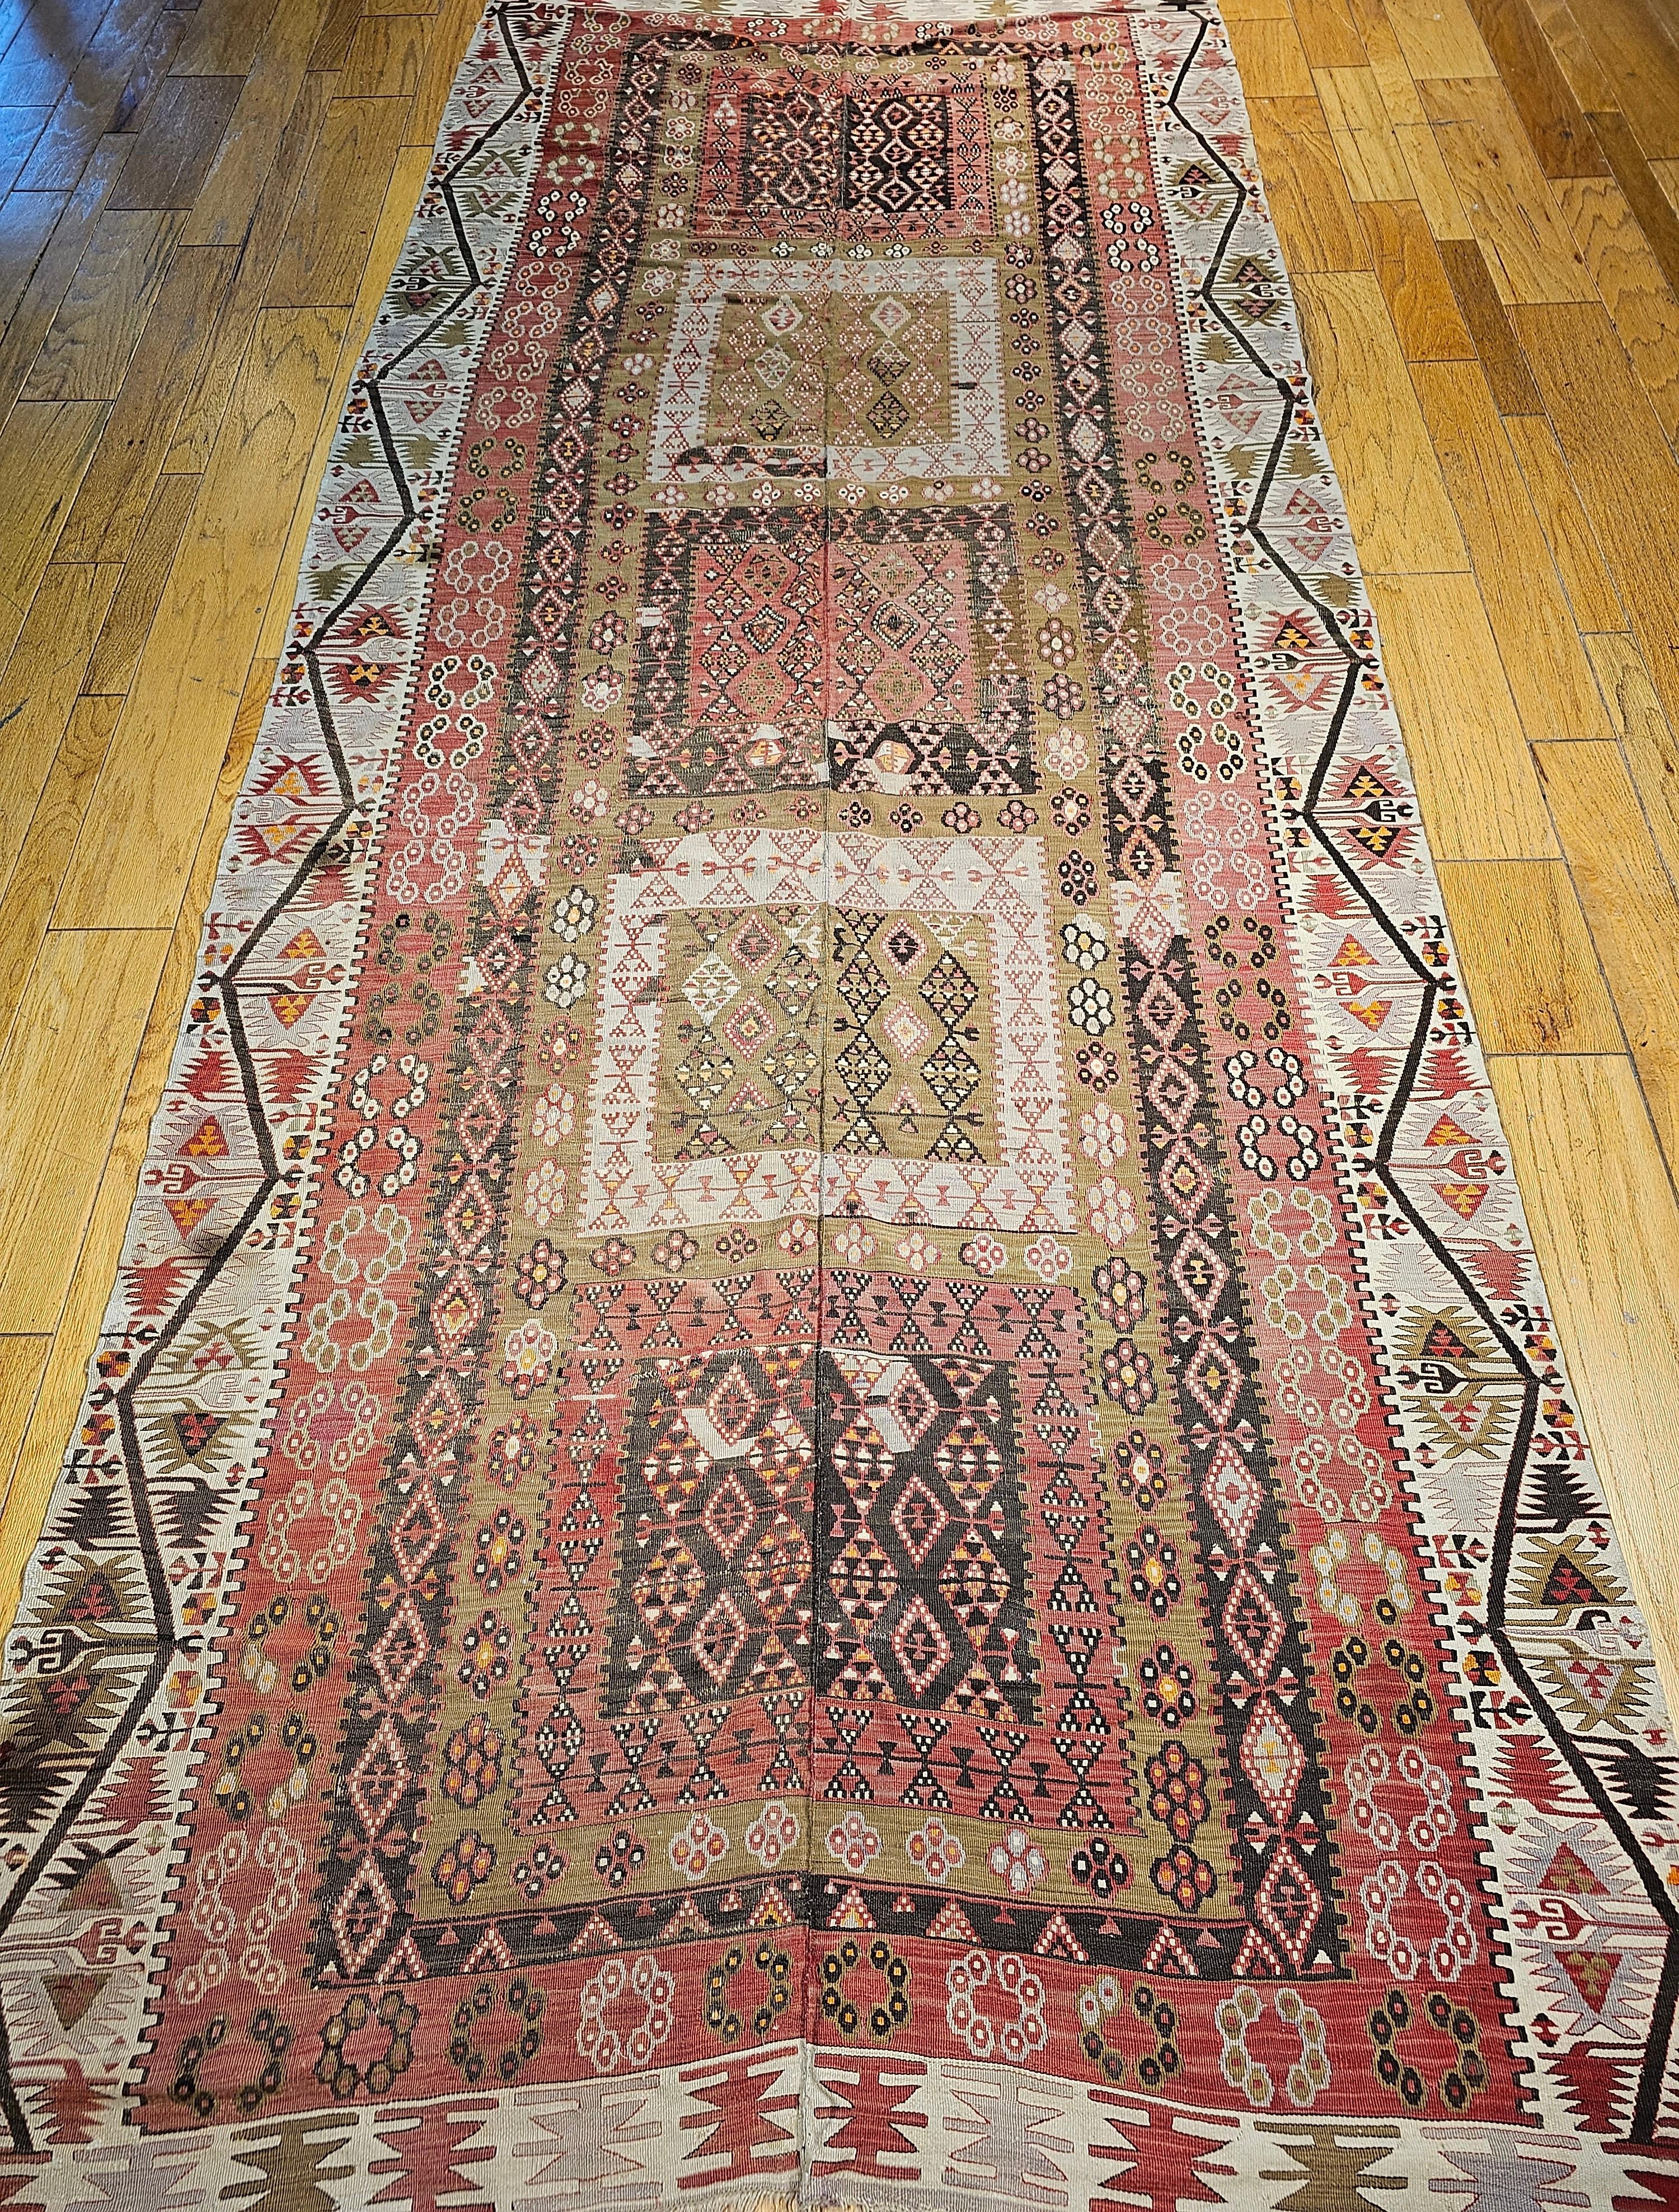 Vintage Turkish gallery rug or a wide runner flat woven kilim from the early 1900s.  The kilim has beautiful soft colors including pale brick red in the field which is formed by 5 large rectangular medallions in a column in different colors and